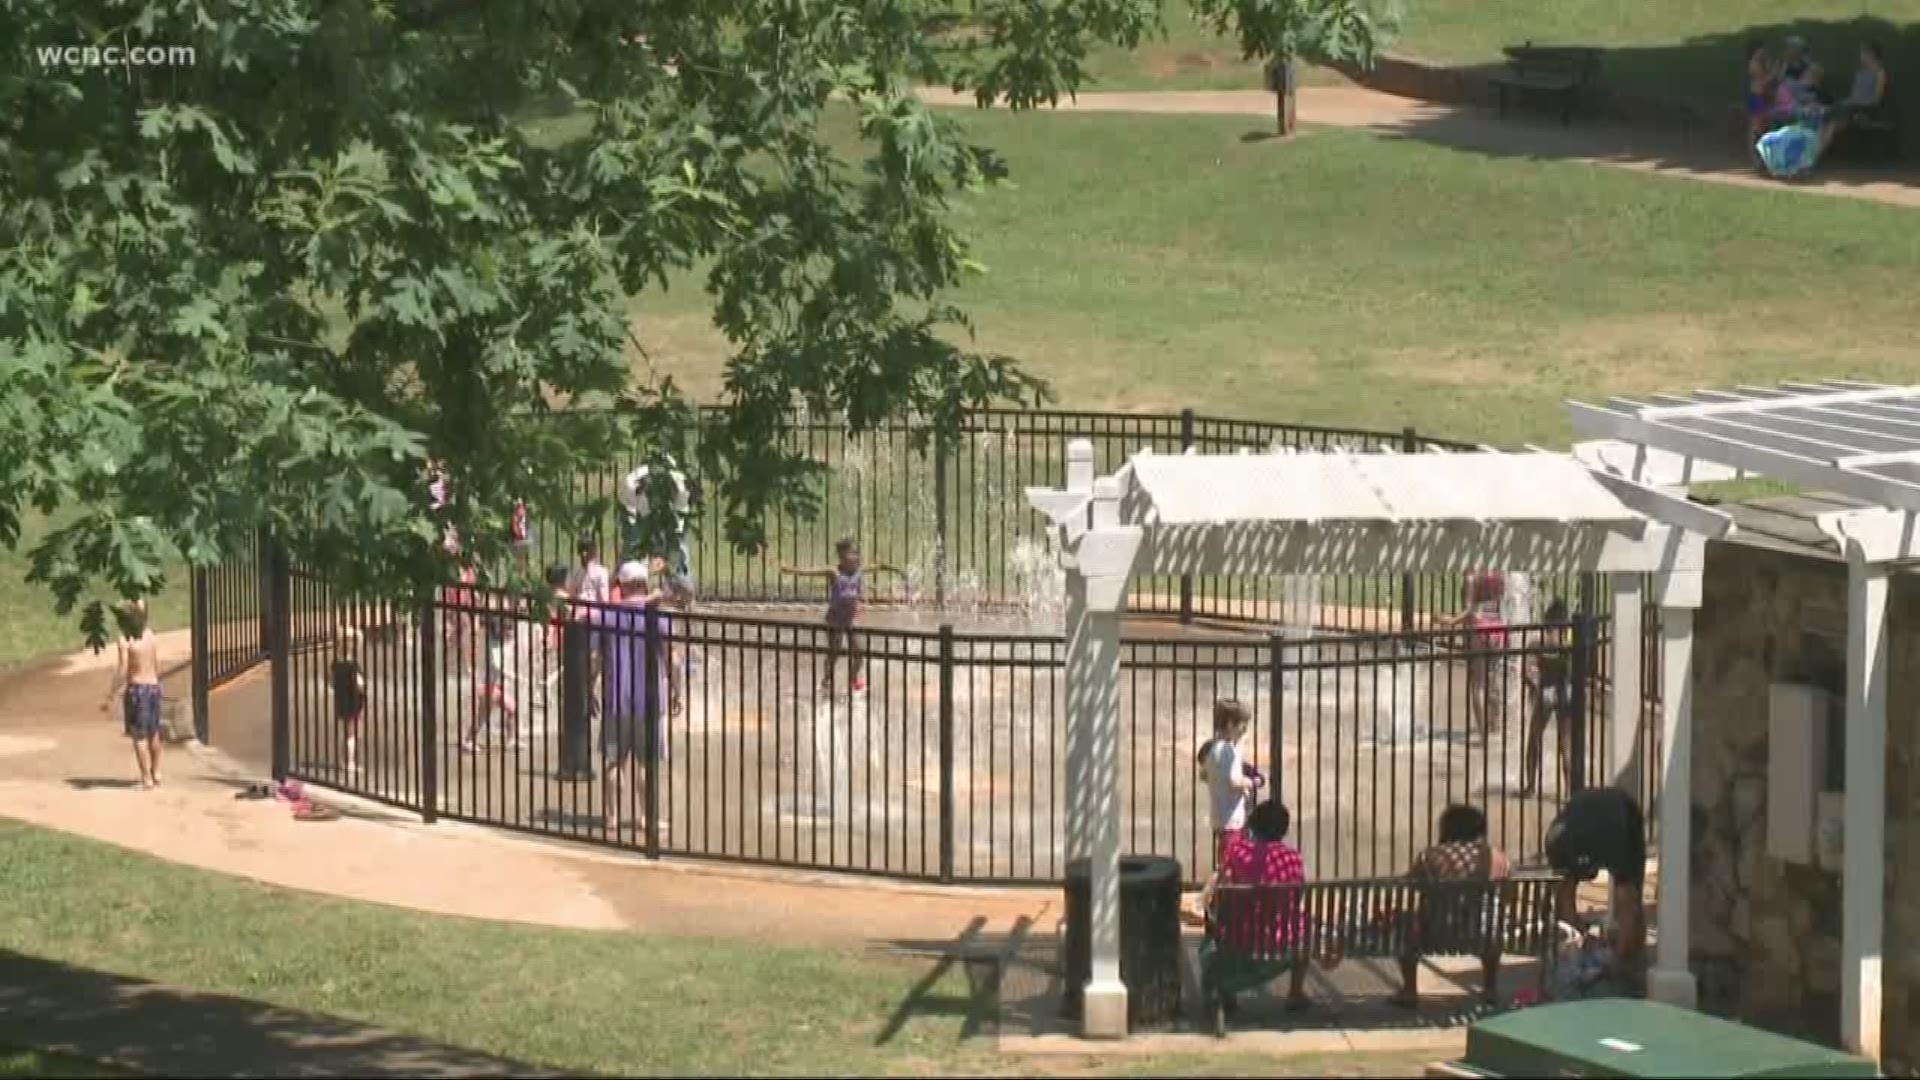 Kelly Wilson says it started at Latta Park in Dilworth at around 4 p.m. on Sunday. Wilson tells NBC Charlotte the other mom was angry her children were being splashed at the splash pad.